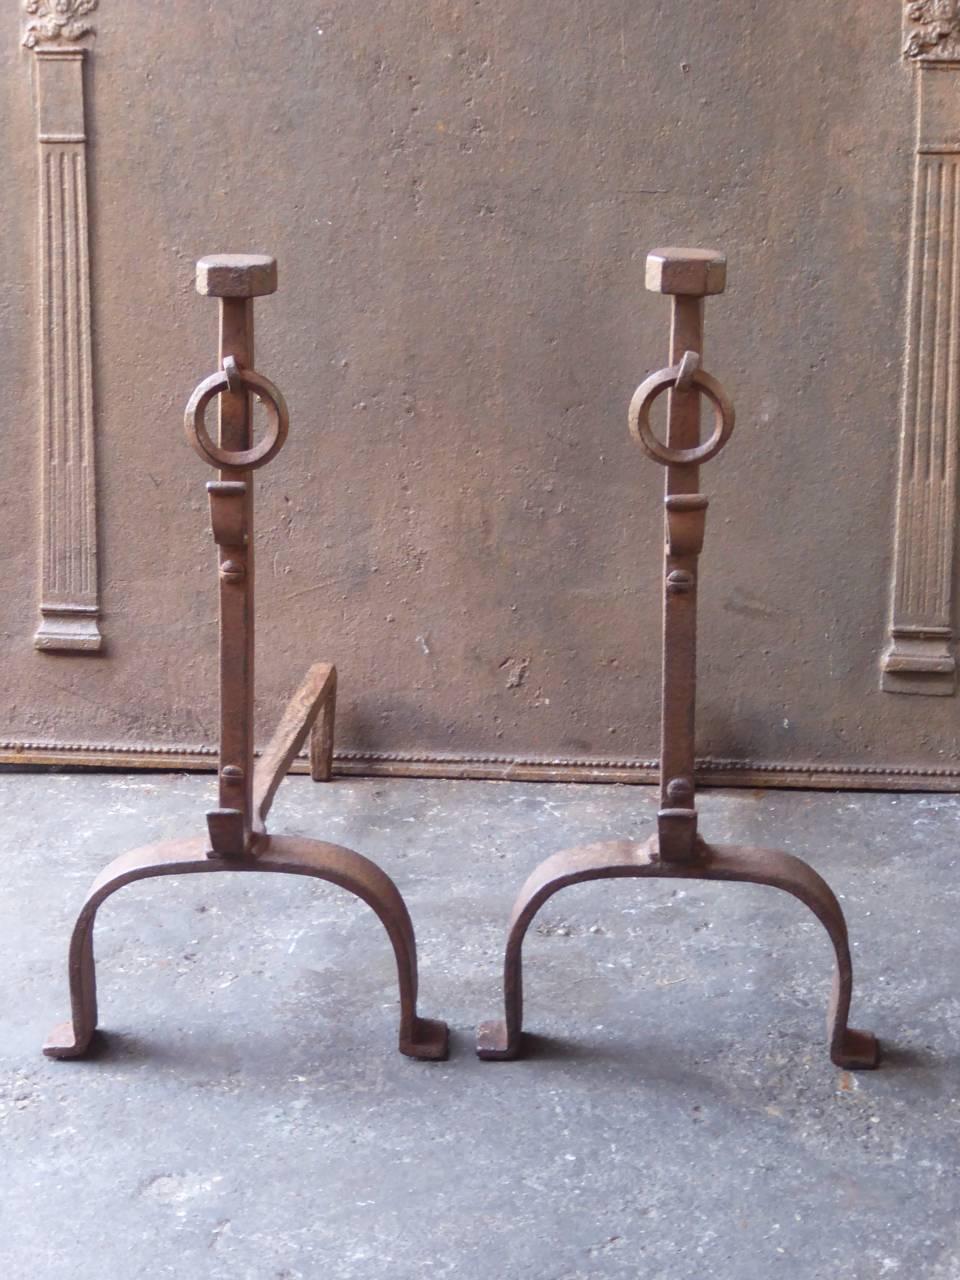 19th century French fire dogs made of wrought iron. The andirons have spit hooks to grill food.

We have a unique and specialized collection of antique and used fireplace accessories consisting of more than 1000 listings at 1stdibs. Amongst others,